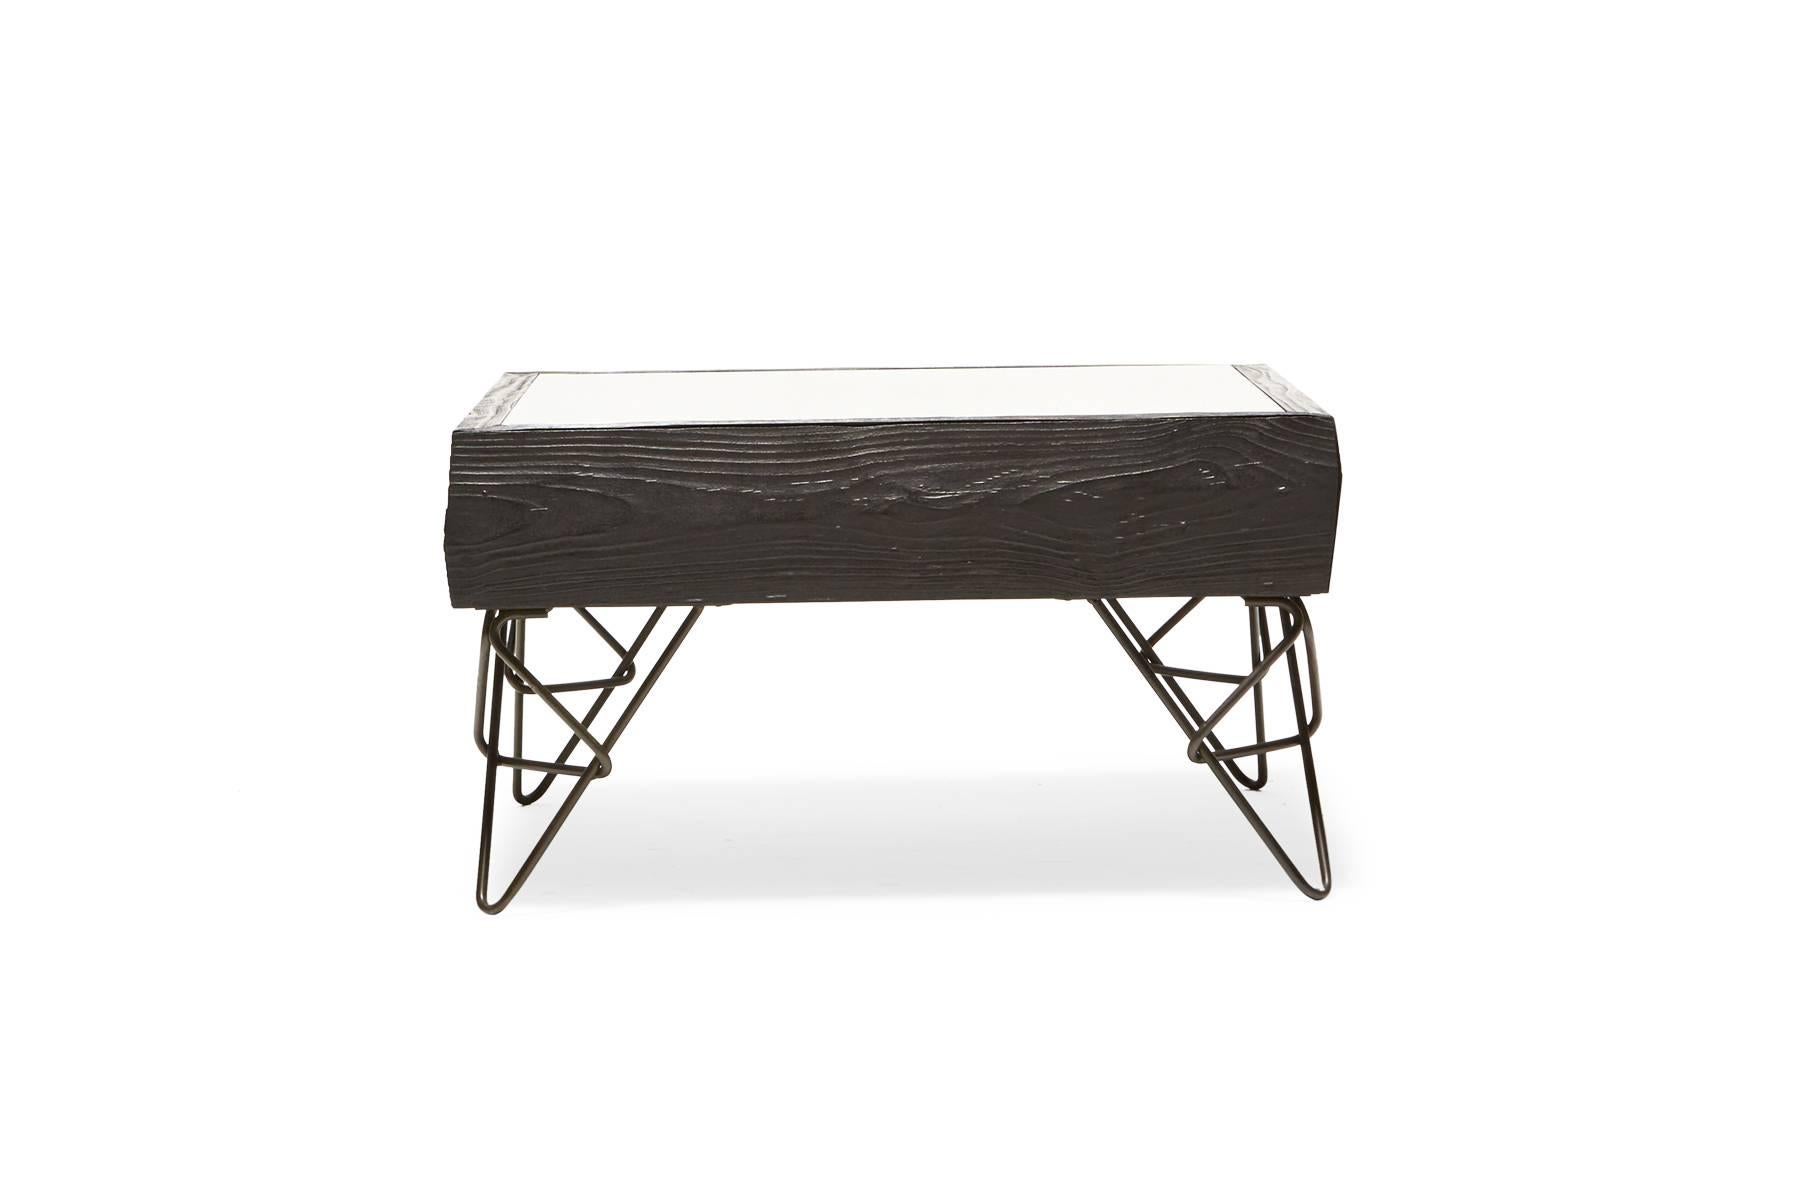 Sandblasted then ebonized alder wood to simulate the effect that water and sand have on driftwood, paired with black hairpin legs in a unique design. The table has a hidden drawer to allow out-of-sight storage as well as access to the wood tray